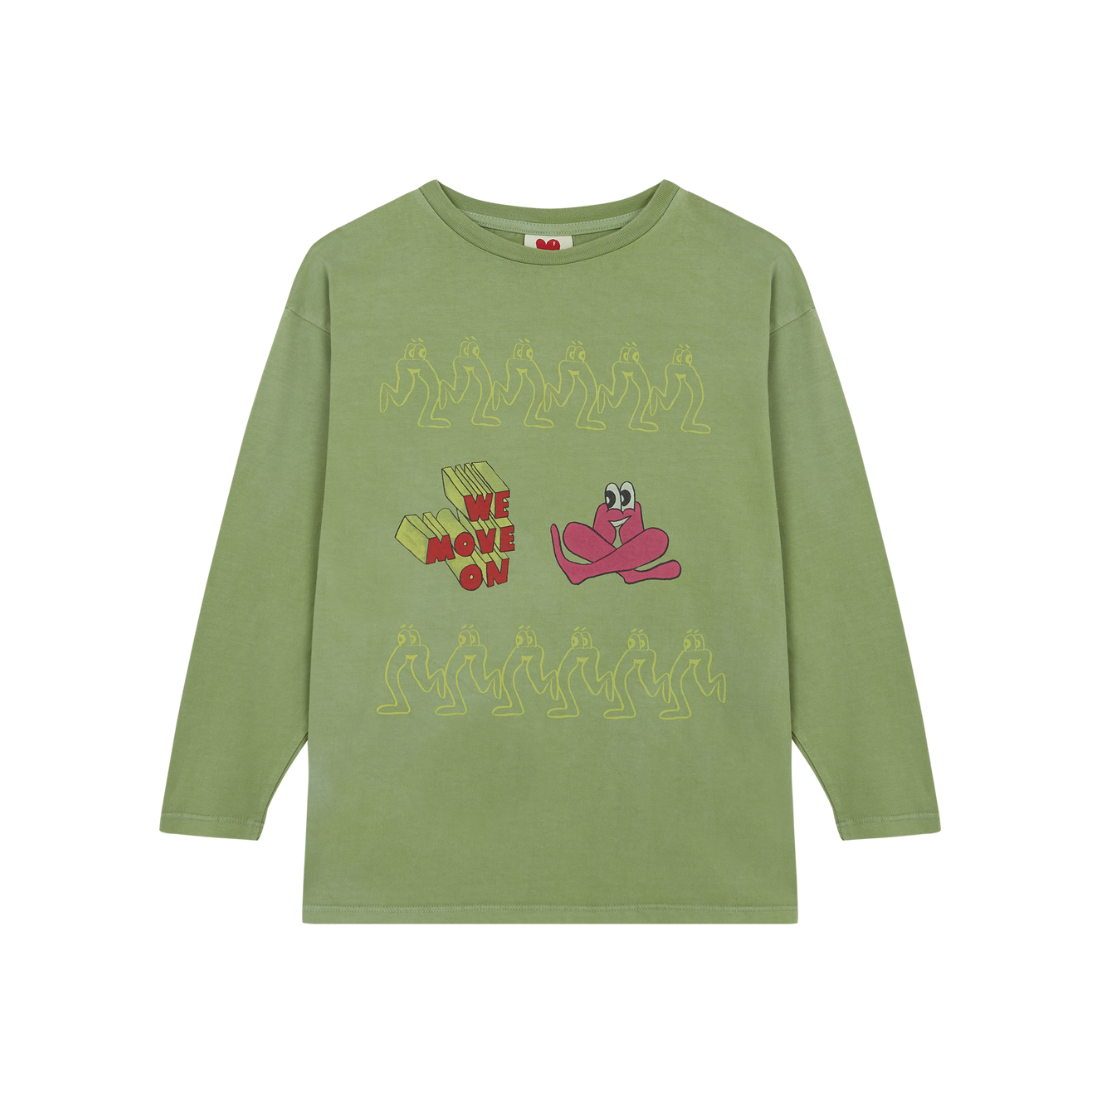 Fresh Dinosaurs - T-shirt long sleeves we move on / 2-3y & 8-9y